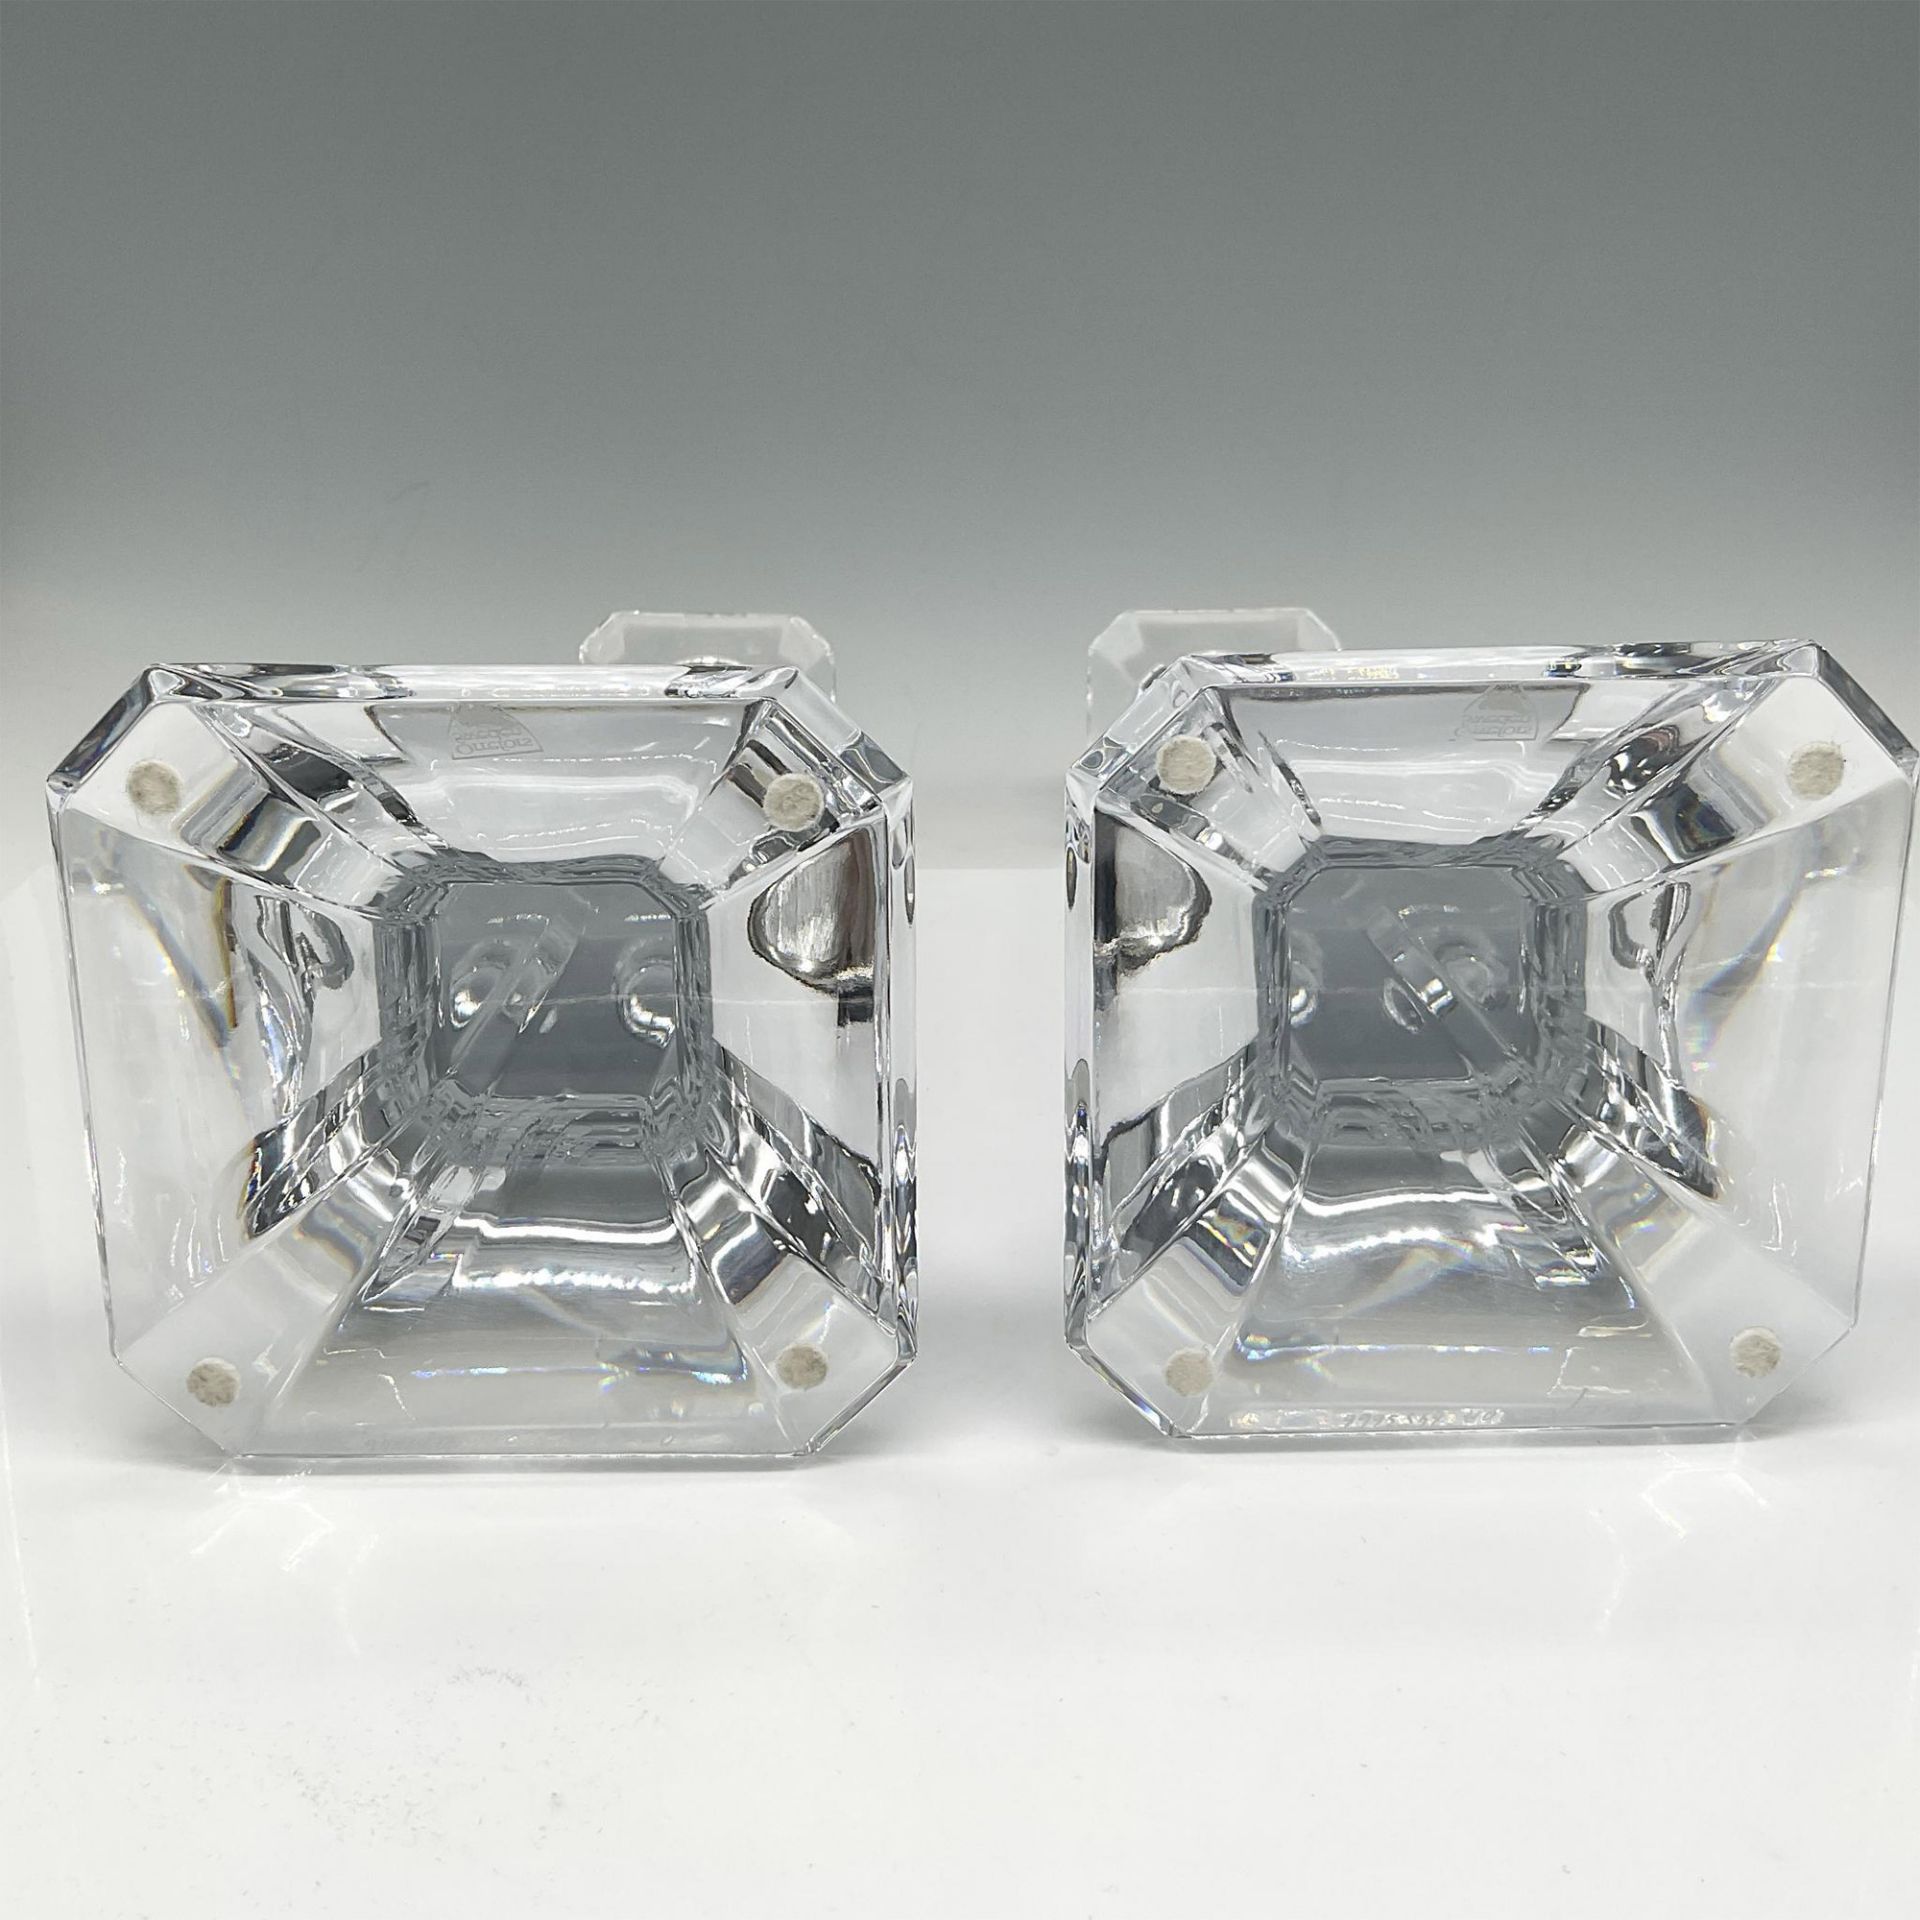 Pair of Orrefors Crystal Candle Holders - Image 4 of 4